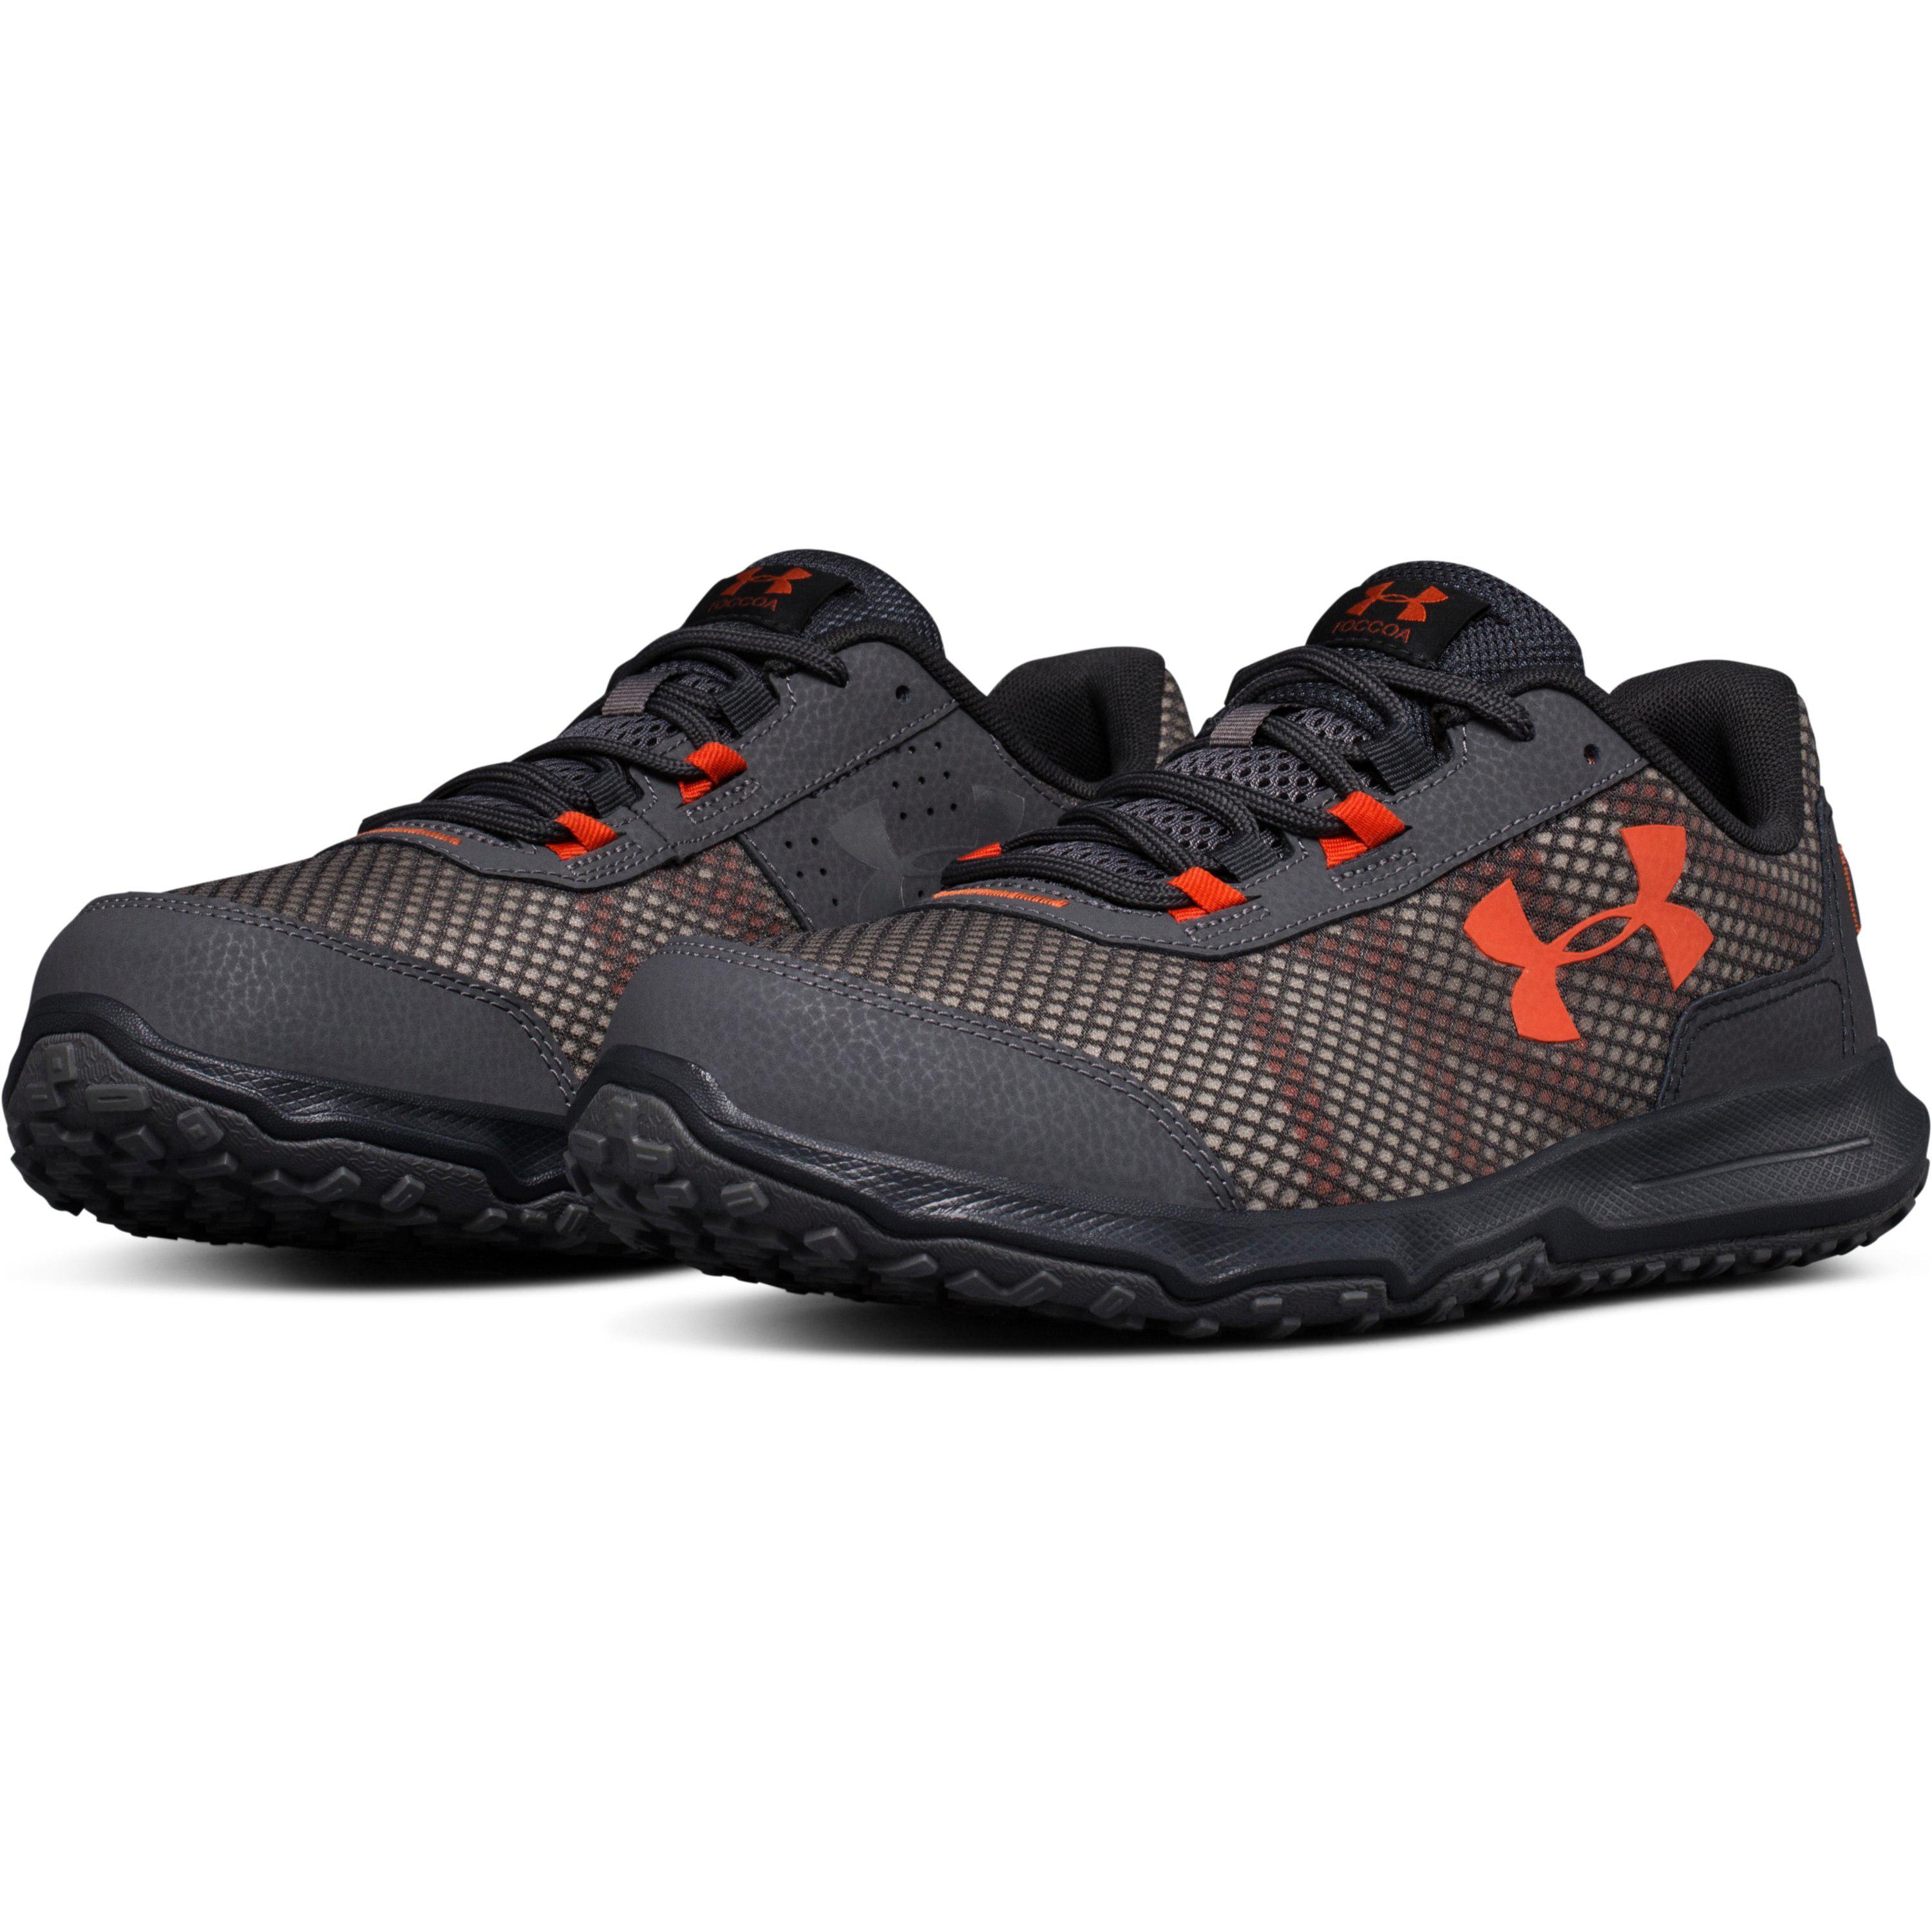 Under Armour Men's Toccoa-Wide 4e Running Shoe Men's Trainers